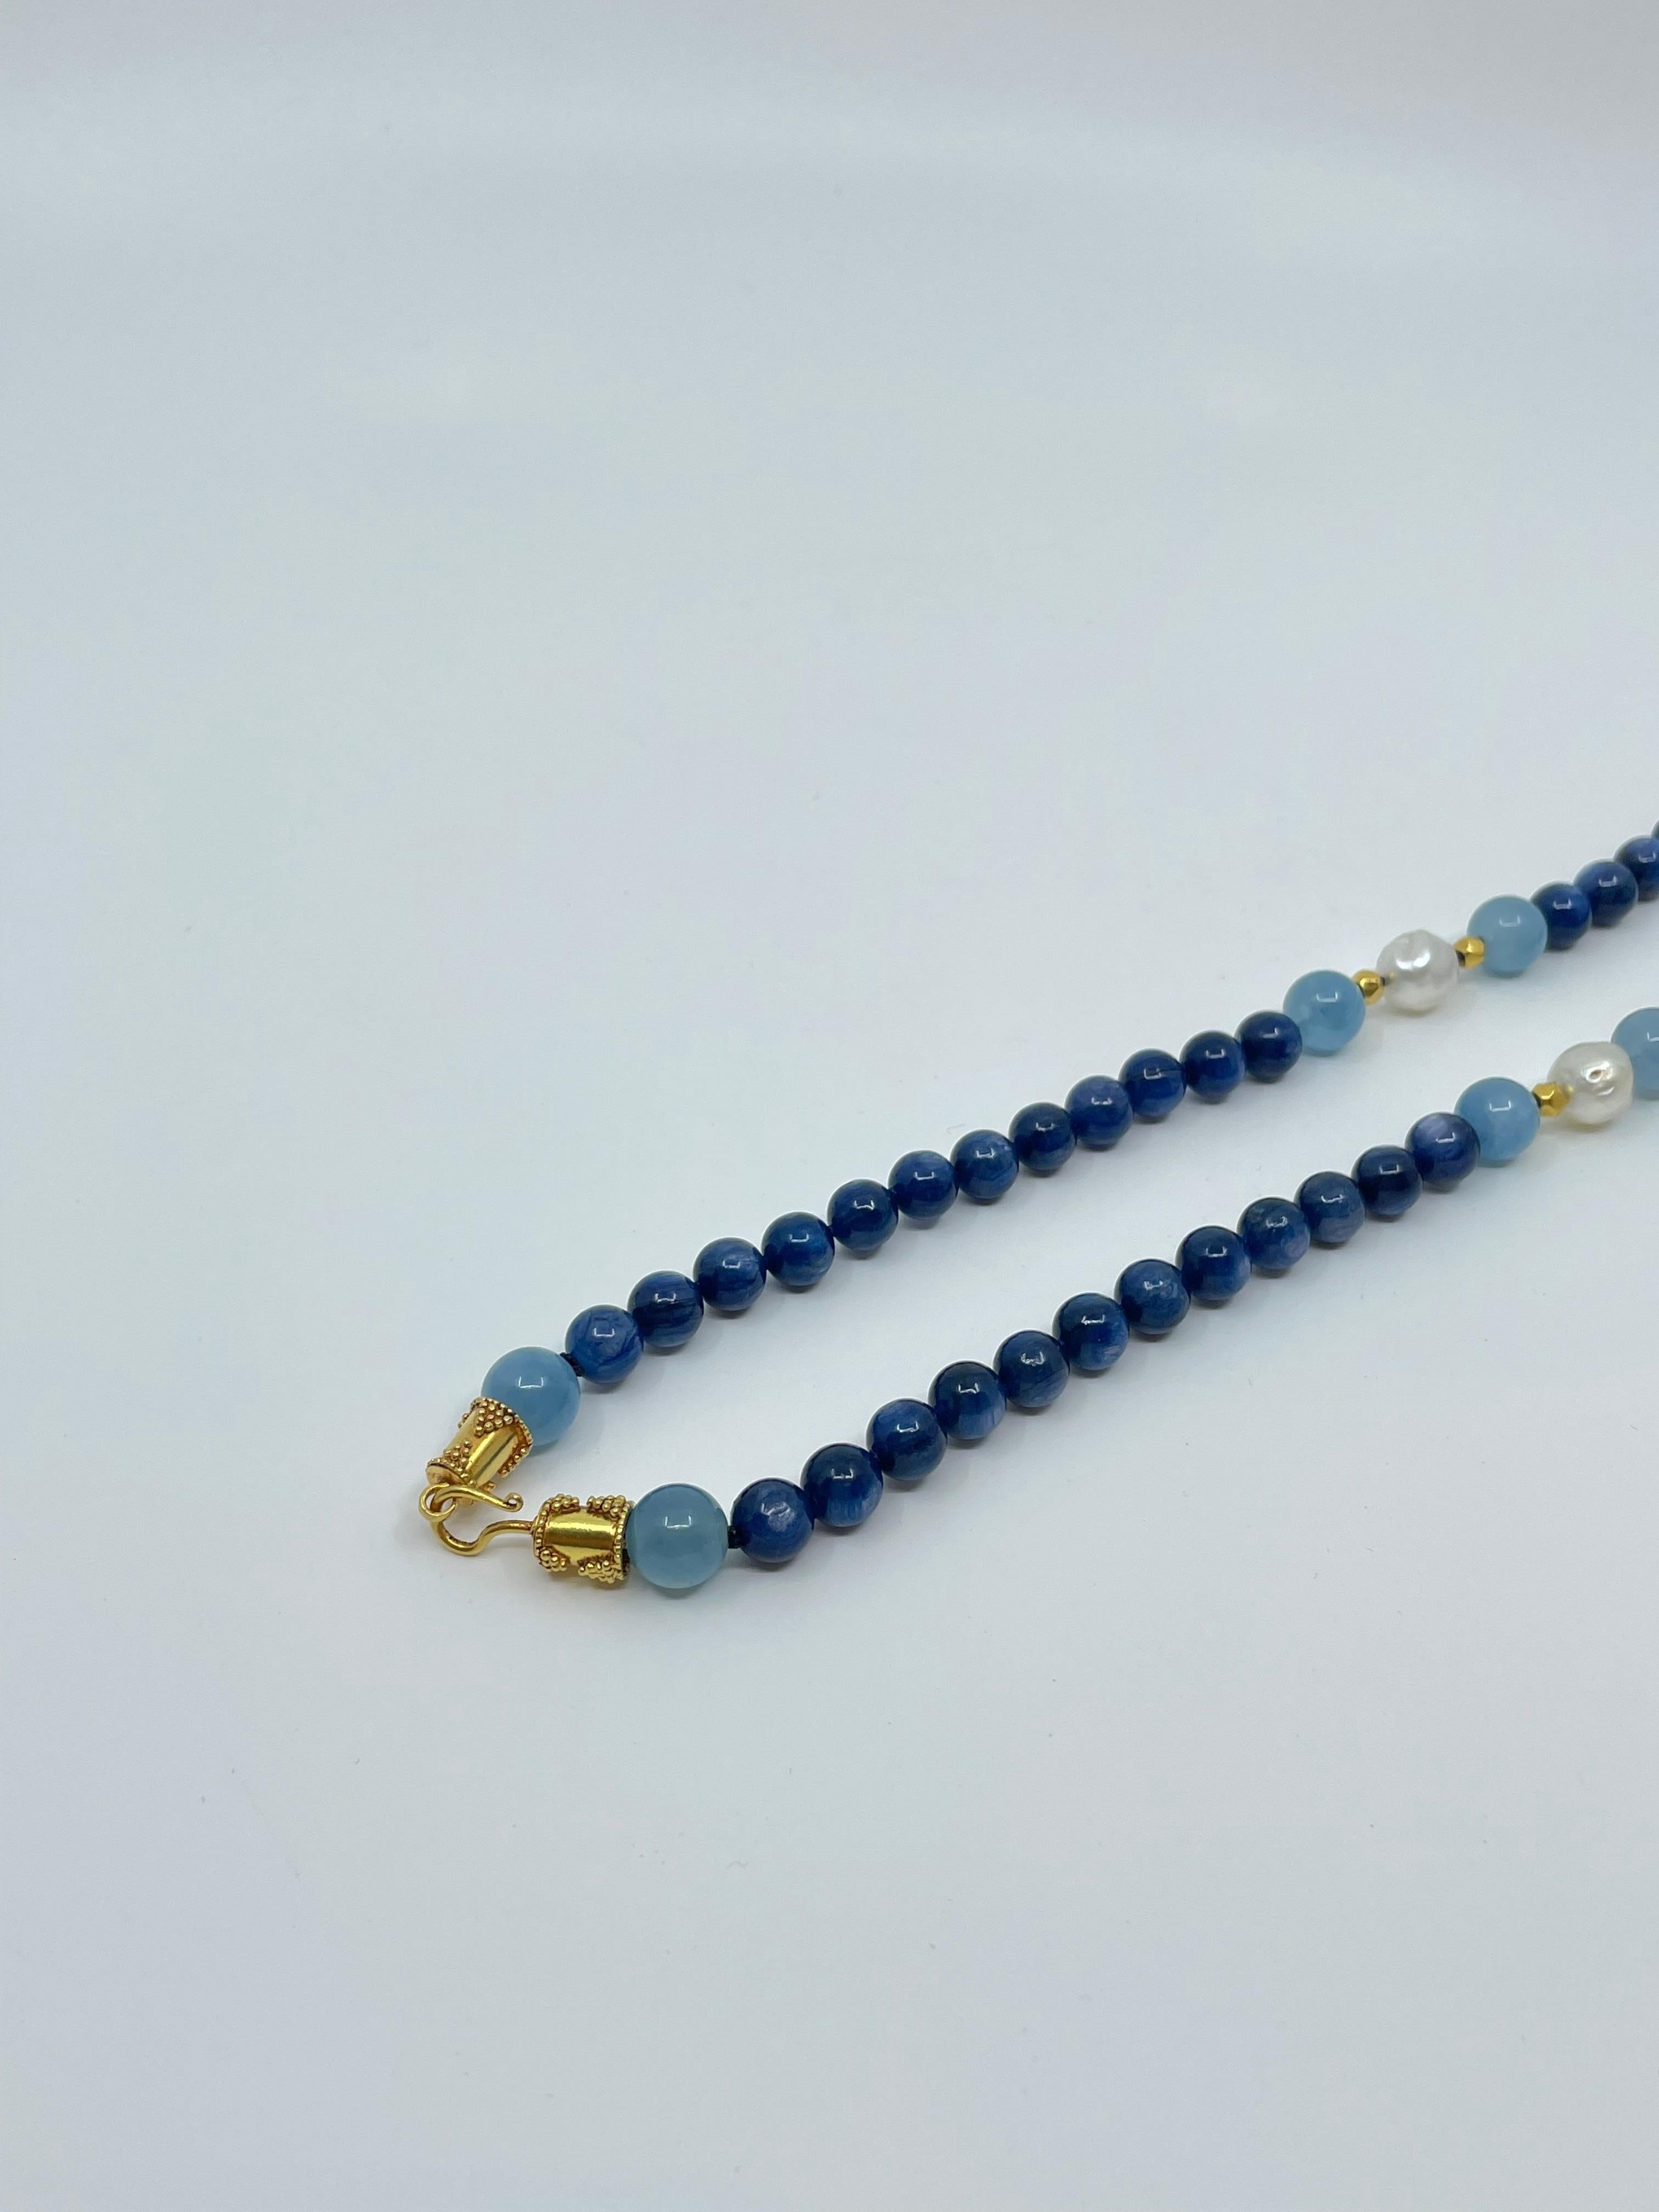 Long Necklace with Kyanite, Aquamarine, South Sea Pearls & 18K Solid Gold Beads For Sale 10